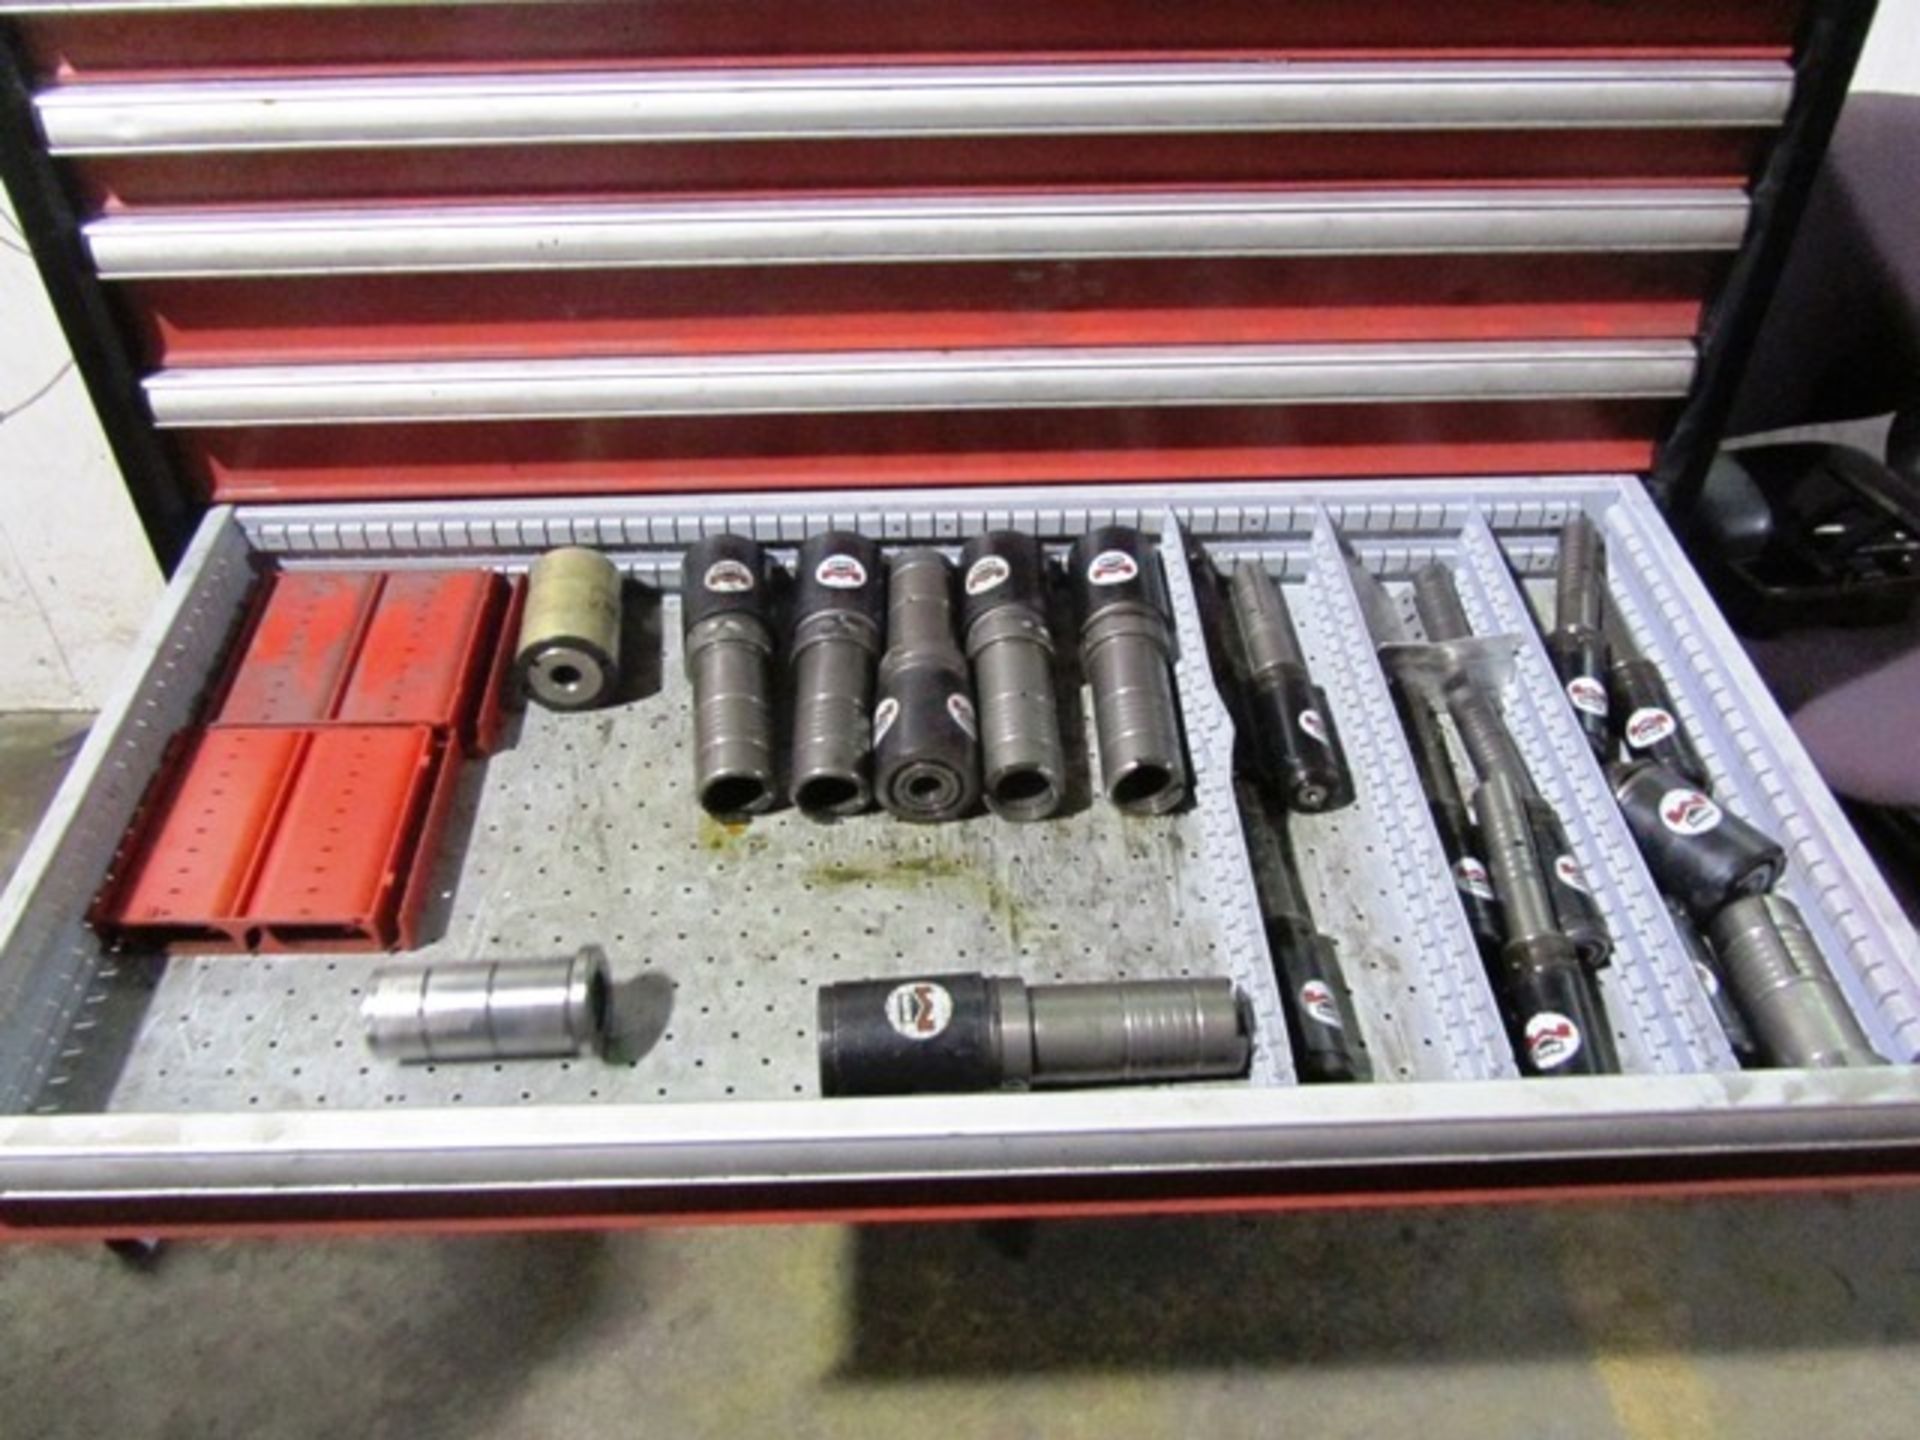 Amada 8 Drawer Portable Tool Cabinet with Punches & Dies - Image 5 of 7